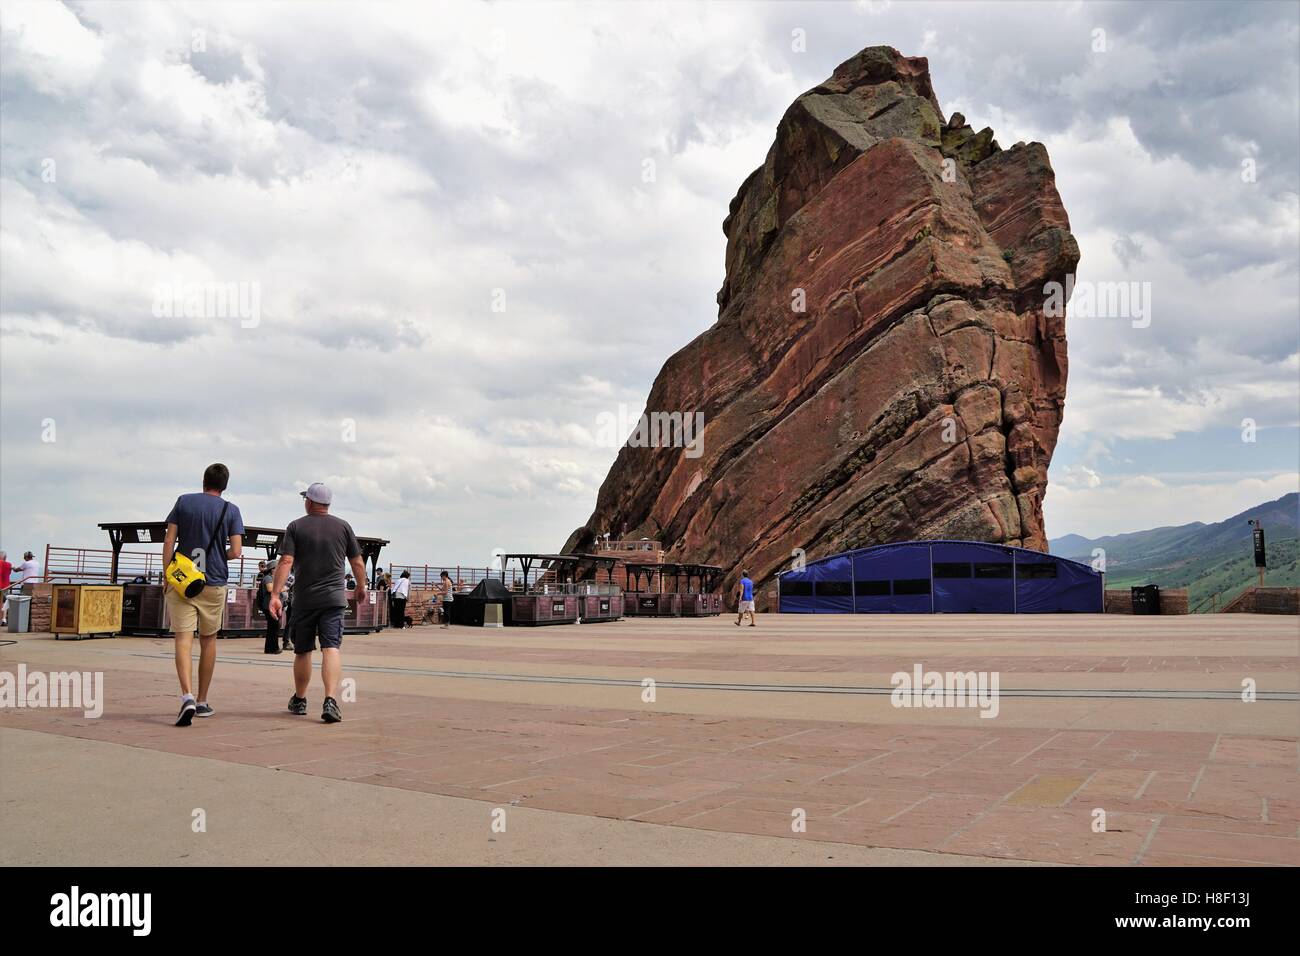 People Walking near a Big Red Rock at Red Rocks Amphitheater, Denver Stock Photo